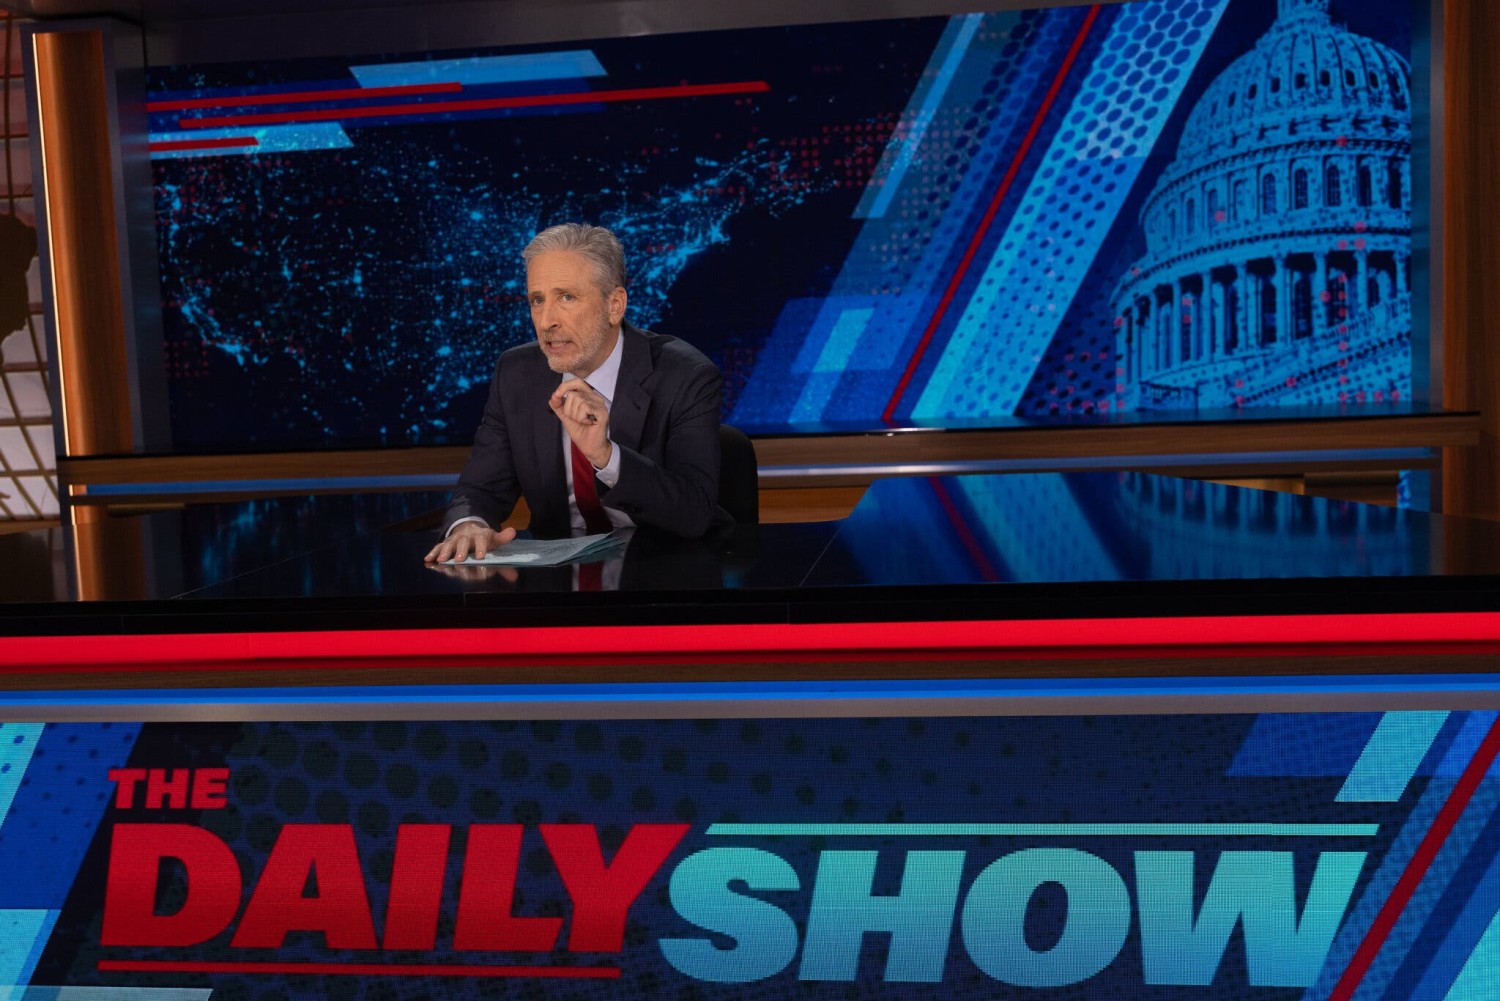 In Calling Out Tucker Carlson, Jon Stewart Reminds Us He Has (Old-Fashioned) Skills